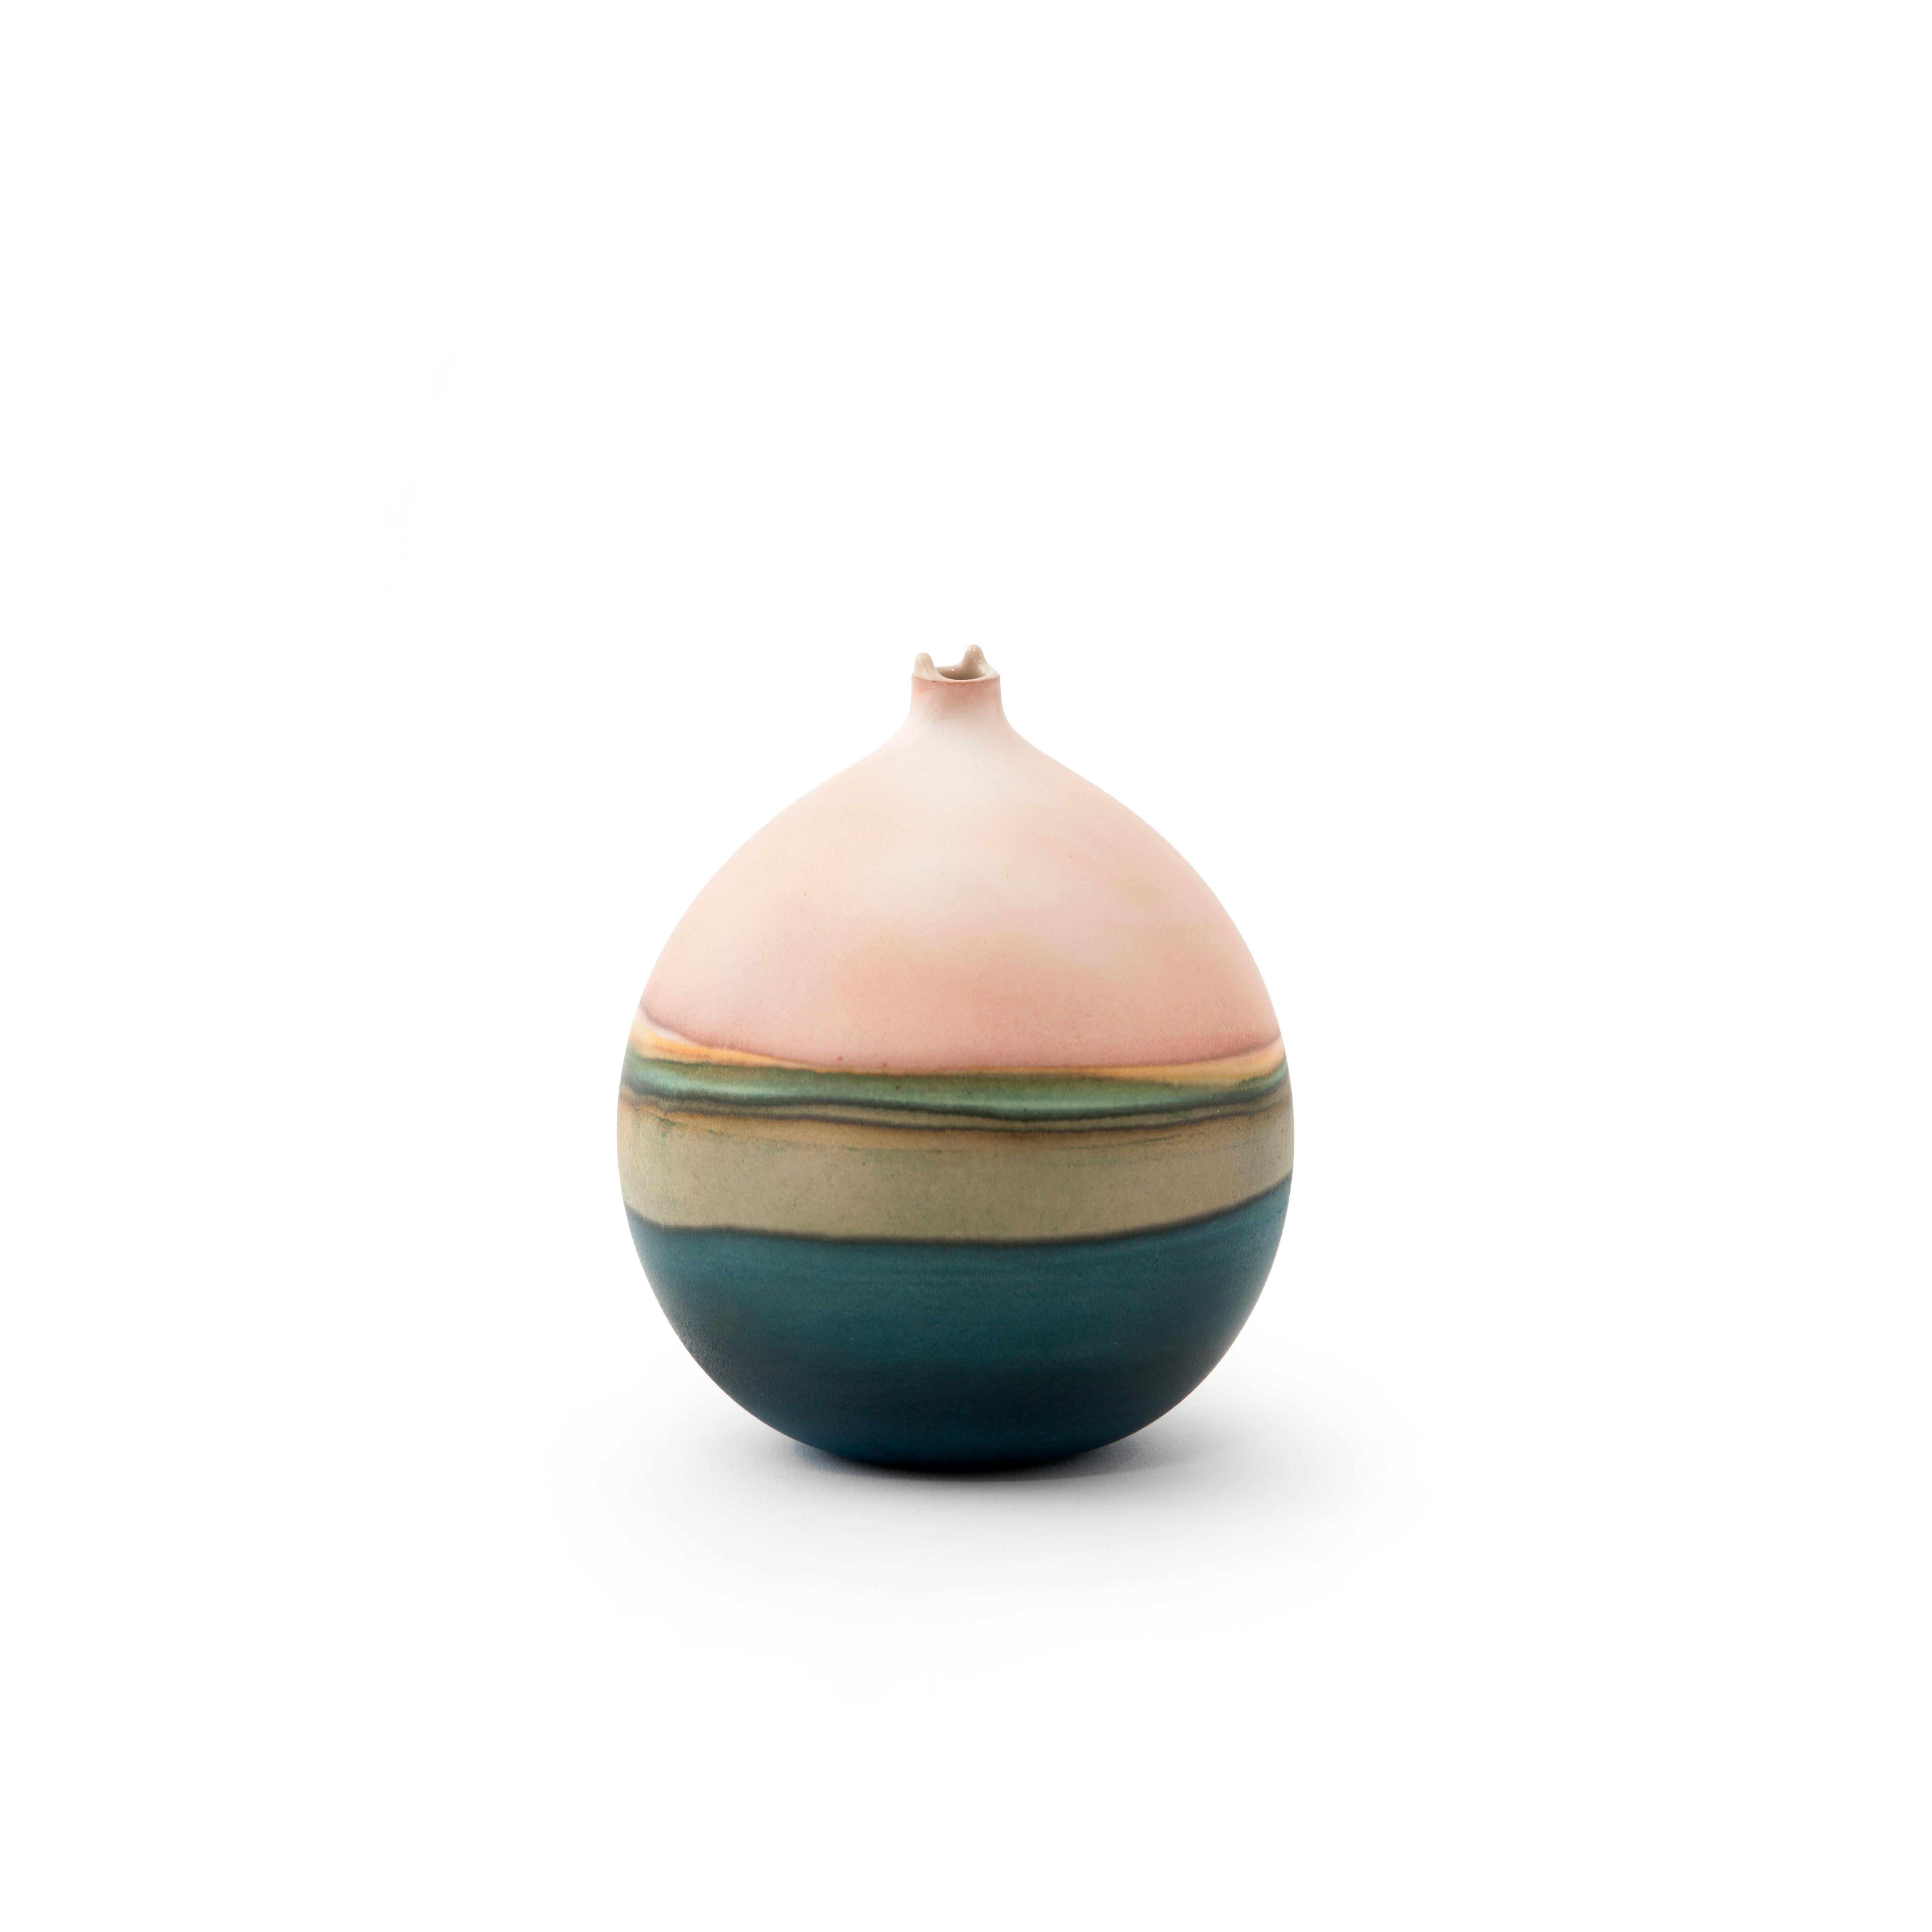 Peach and Prussian pluto vase by Elyse Graham
Dimensions: W 13 x D 13 x H 14 cm
Materials: Plaster, Resin
Molded, dyed, and finished by hand in LA. customization
Available.
all pieces are made to order

This collection of vessels is inspired